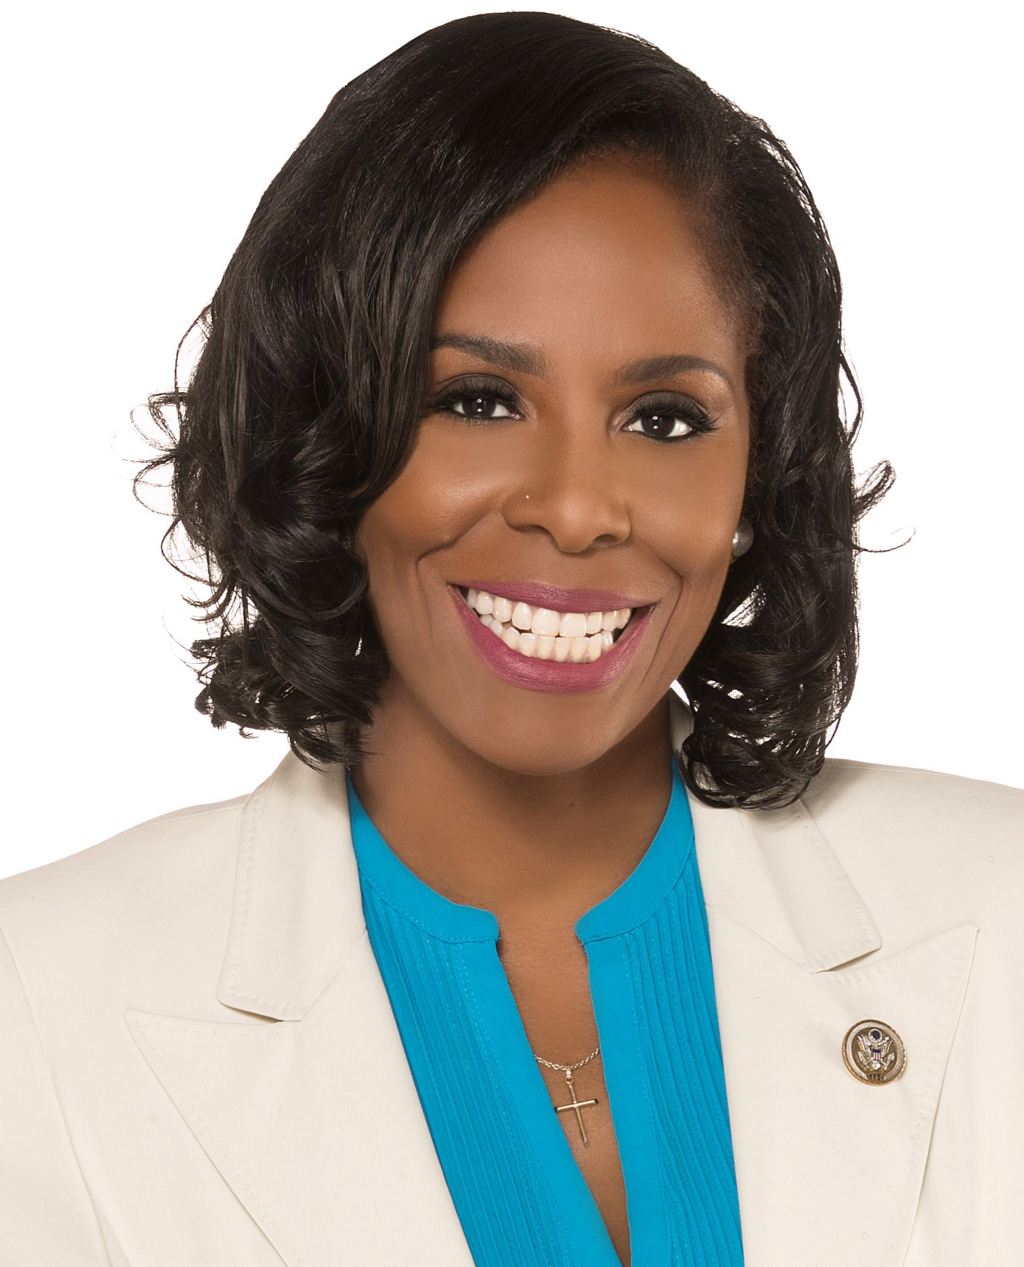 House Leaders Appoint Stacey Plaskett To Powerful Ways And Means Committee | St. Thomas Source